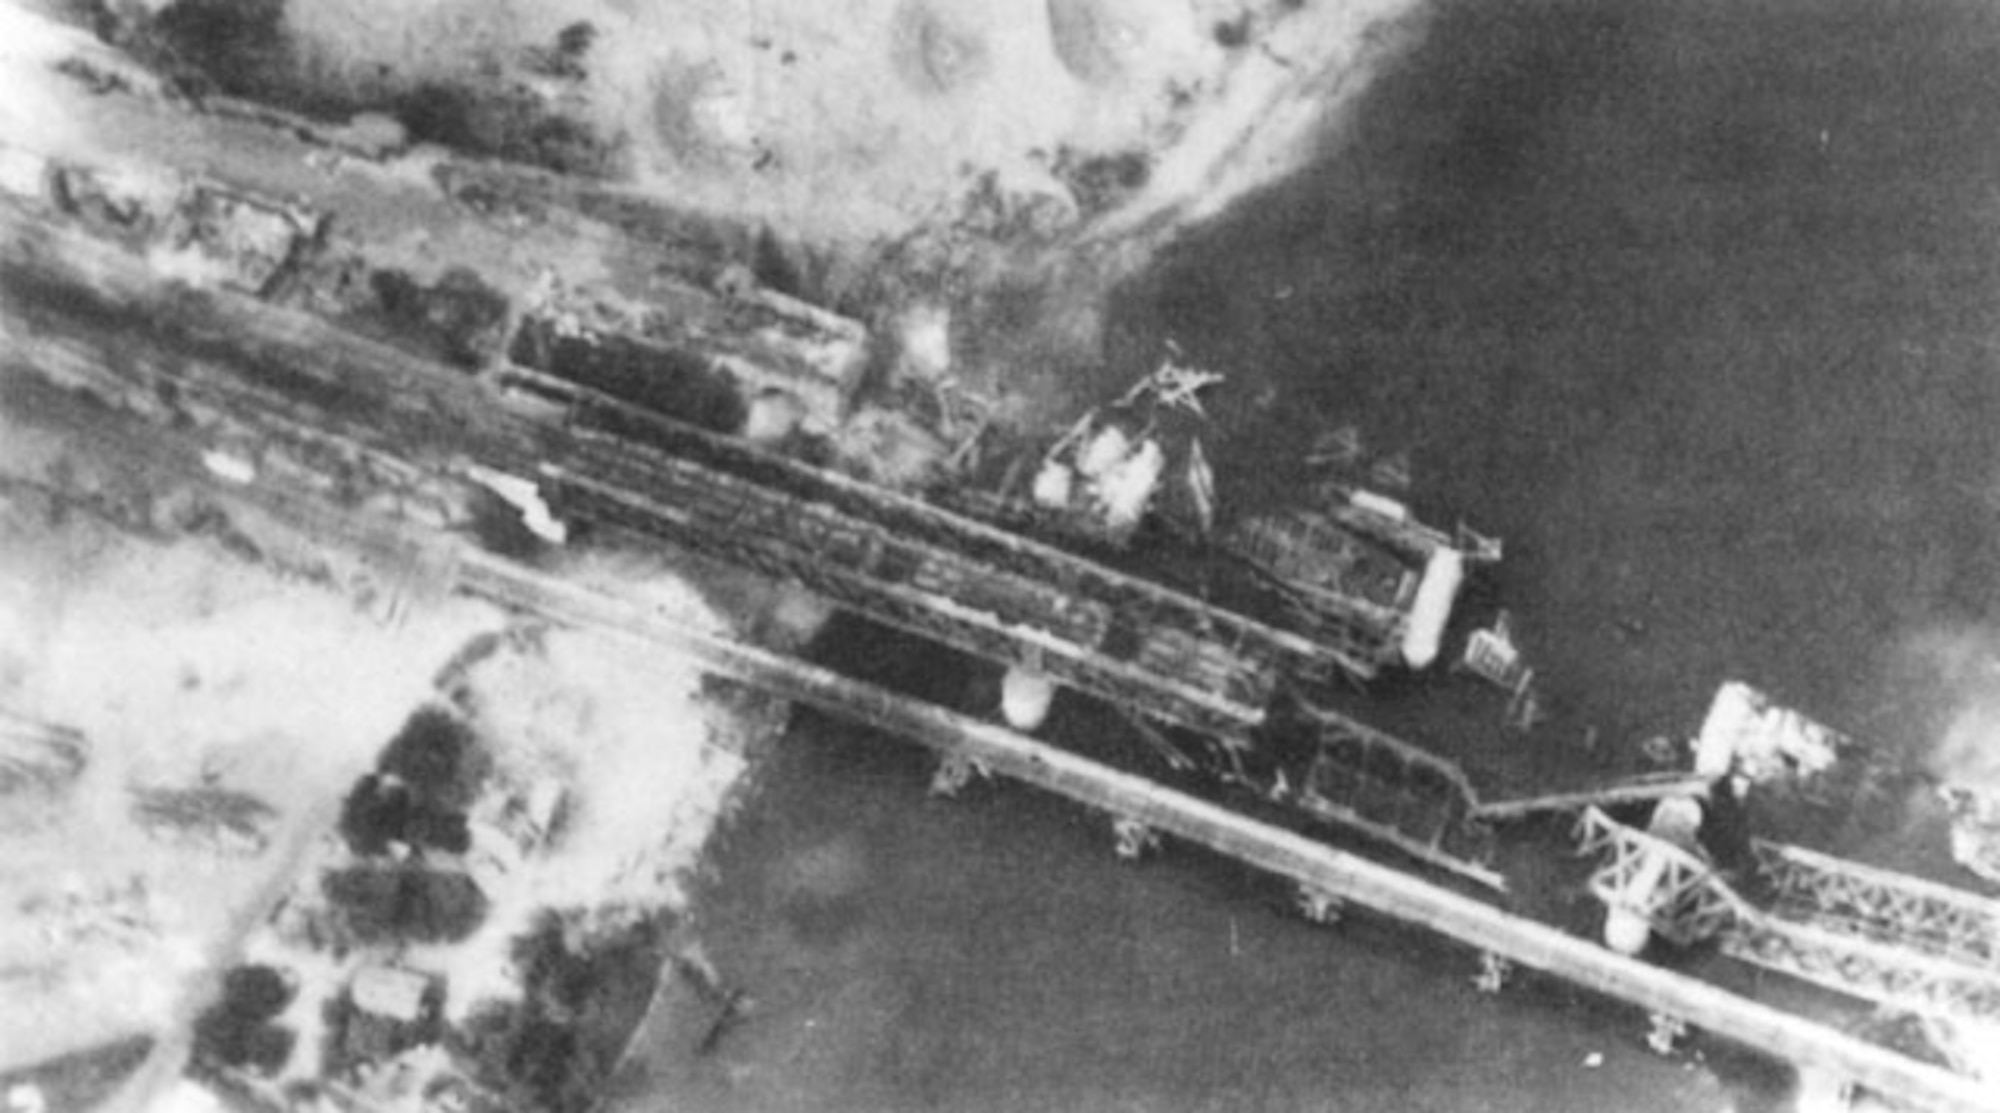 An Allied attack on the bridge over the Seine River at Oissell, France, on May 9, 1945, made the bridge unusable. German forces could not repair the Seine bridges fast enough to keep up with their damage/destruction in spring 1944. (USAAF archival photo)